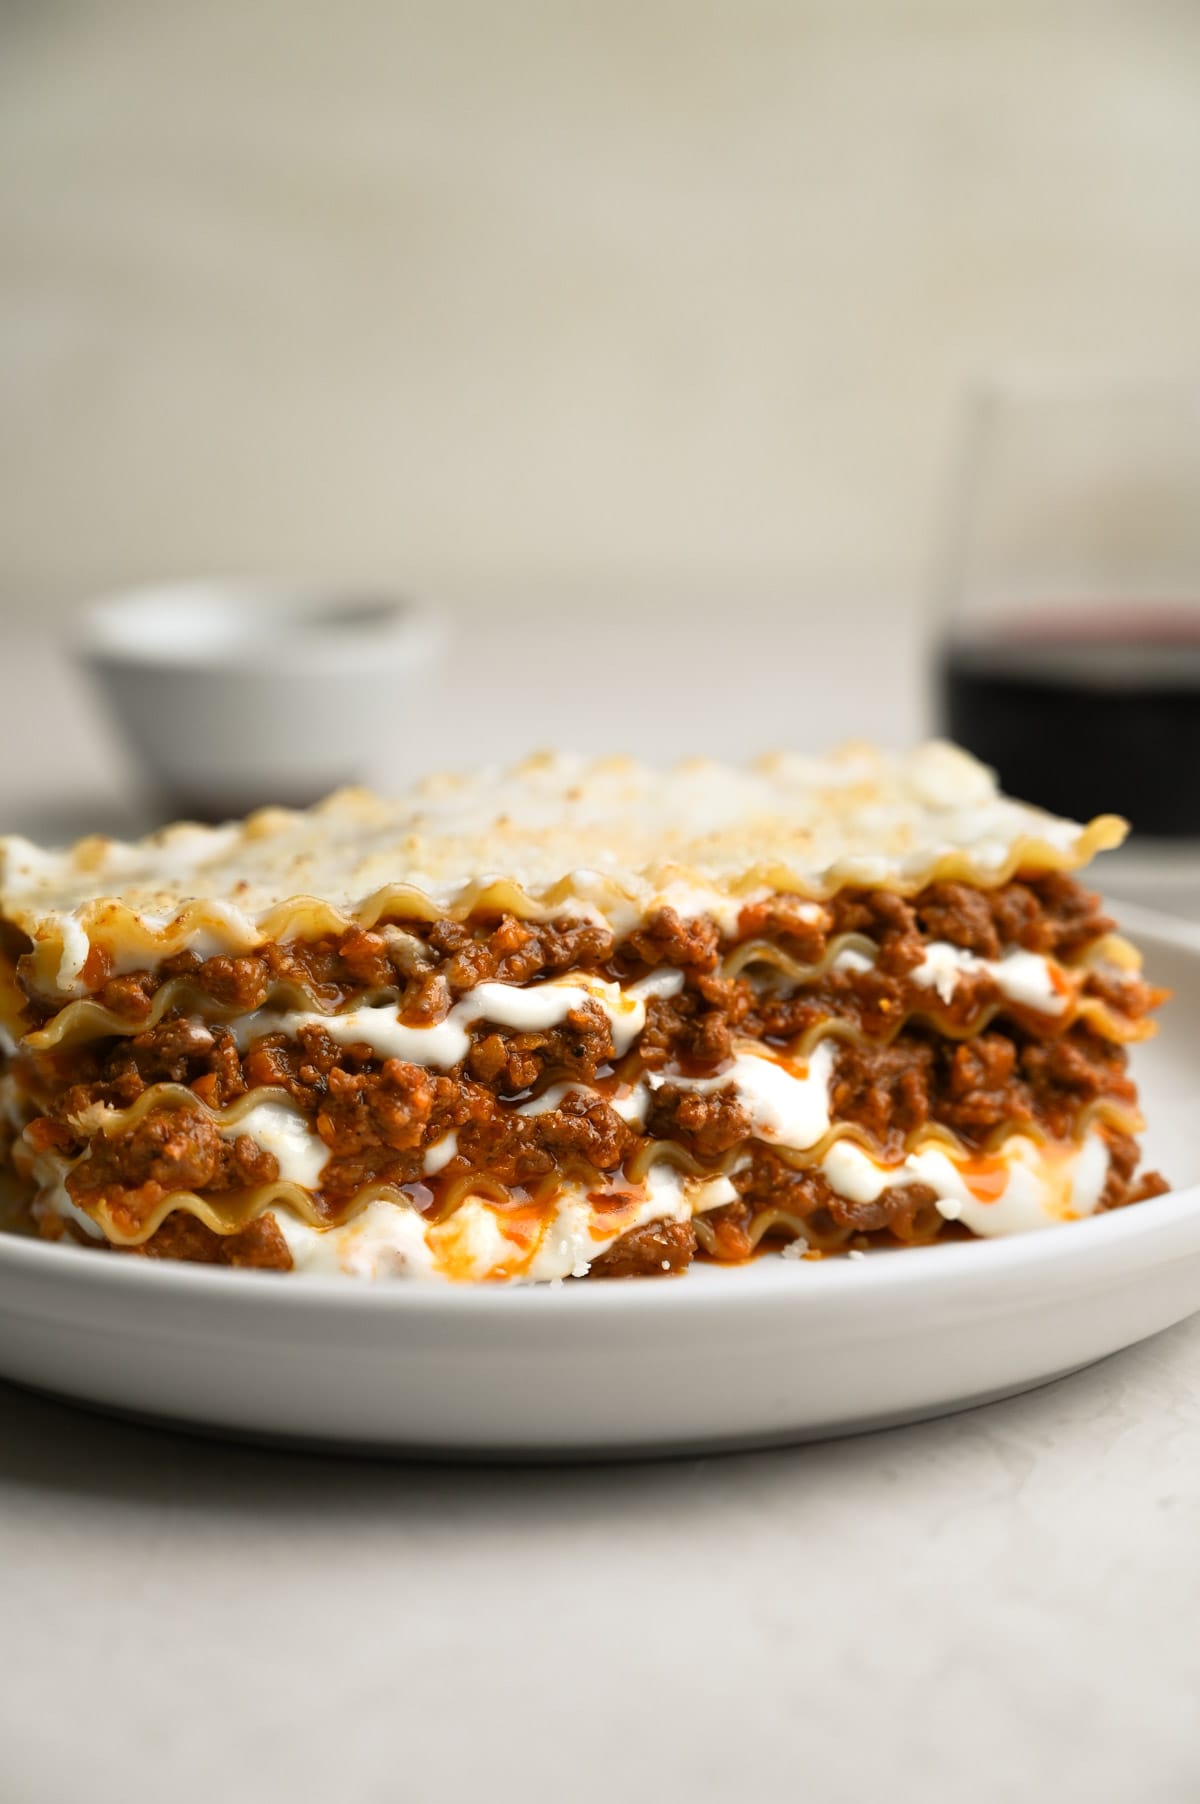 Close up of a plate of Lasagna Bolognese on a cream surface surrounded by a glass of wine, a fork and a bowl of parmesan.